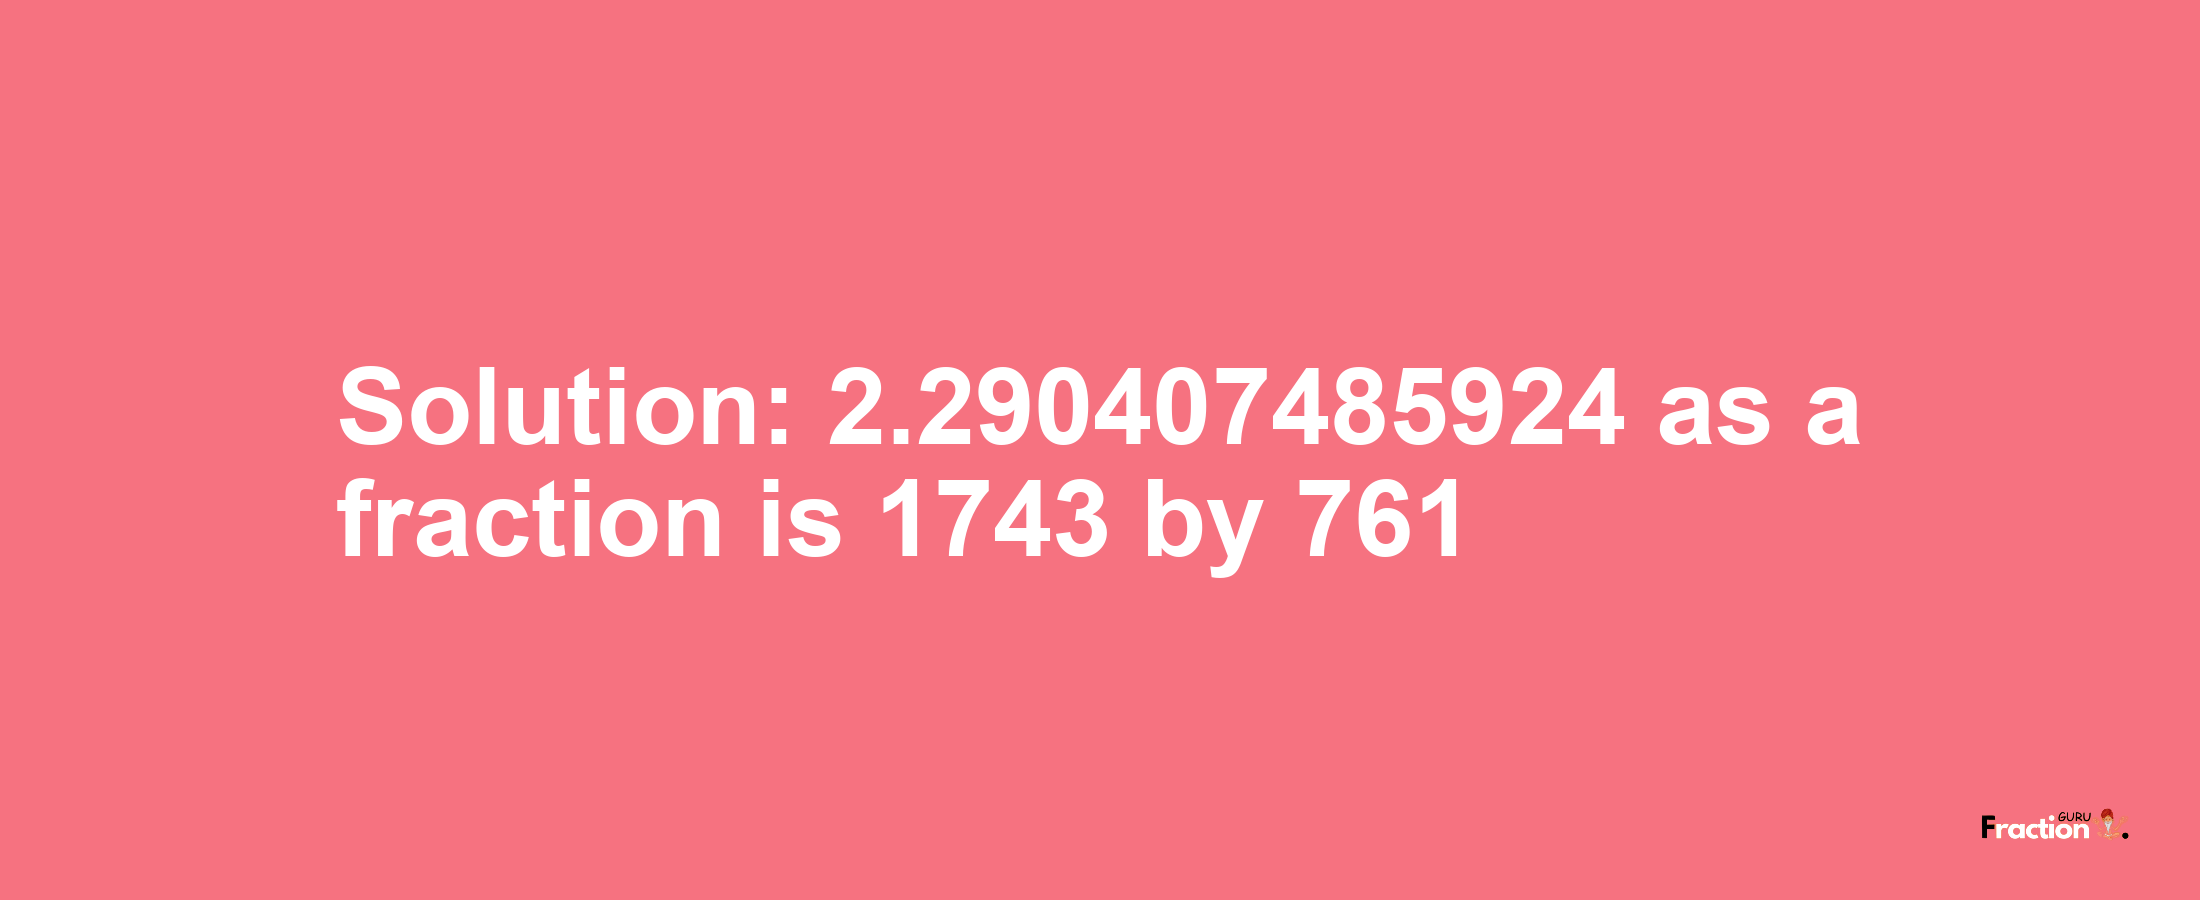 Solution:2.290407485924 as a fraction is 1743/761